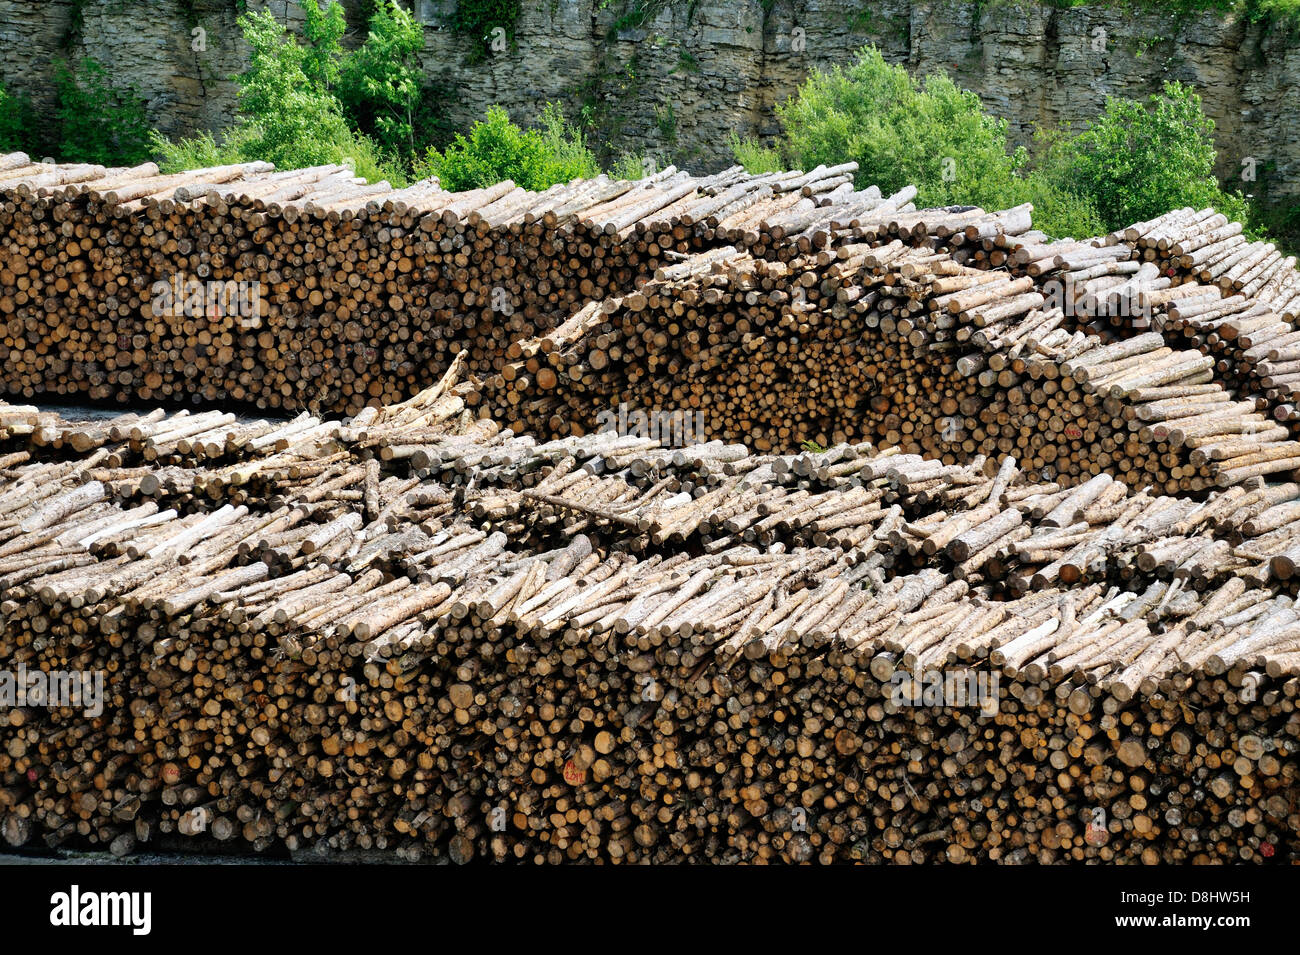 Conifer softwood timber logs stock pile from commercial forestry activity near Much Wenlock, Shropshire, England Stock Photo